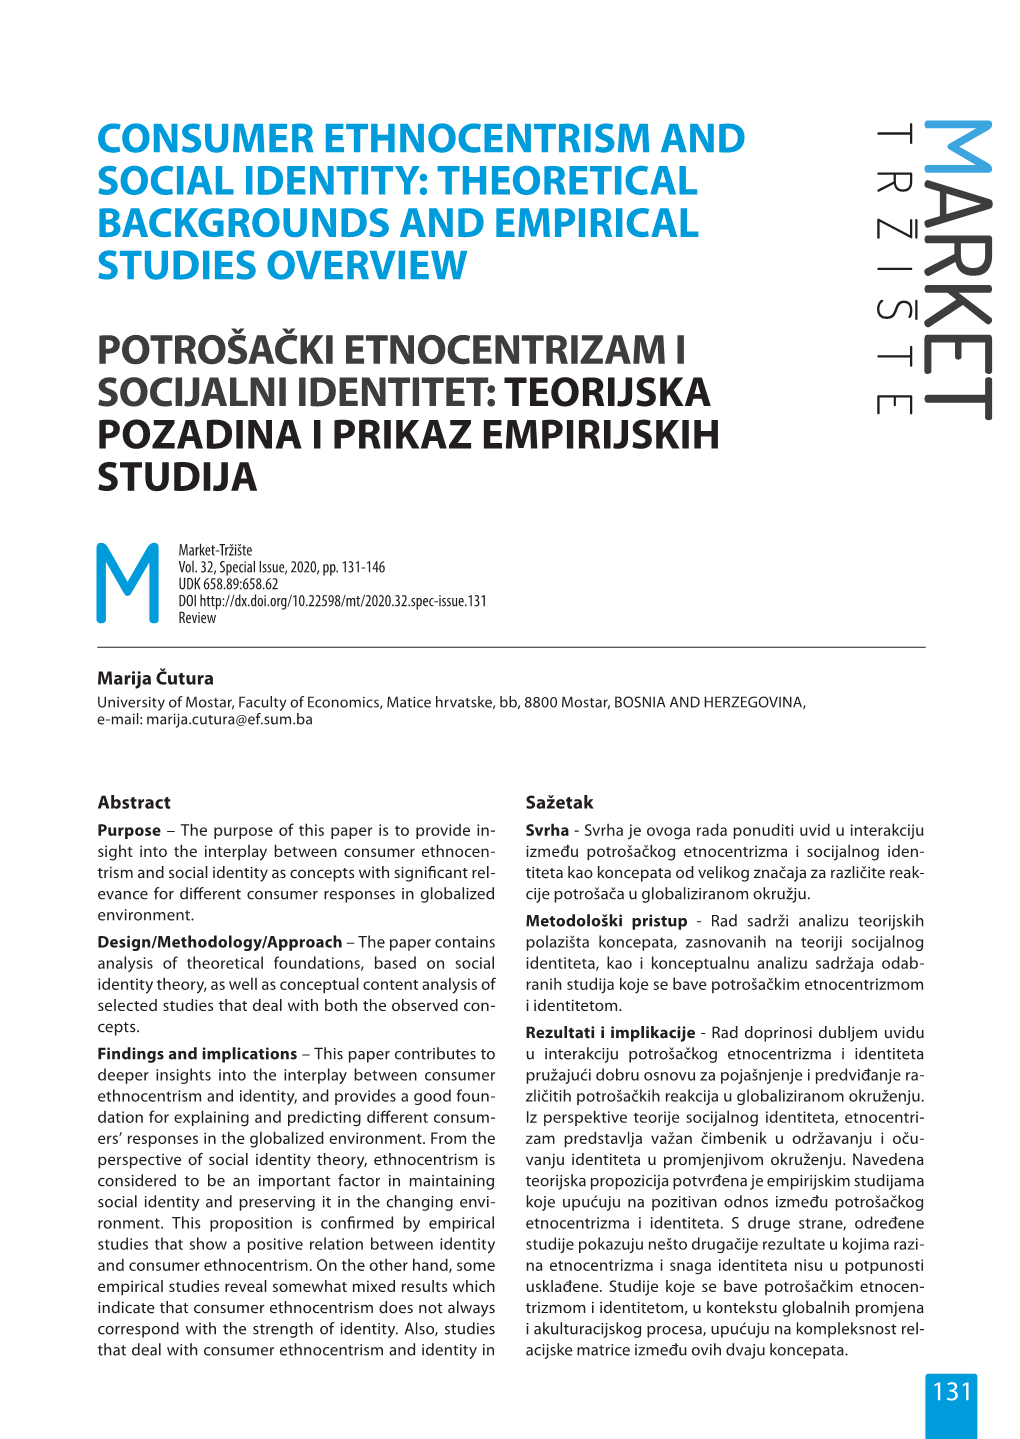 Consumer Ethnocentrism and Social Identity: Theoretical